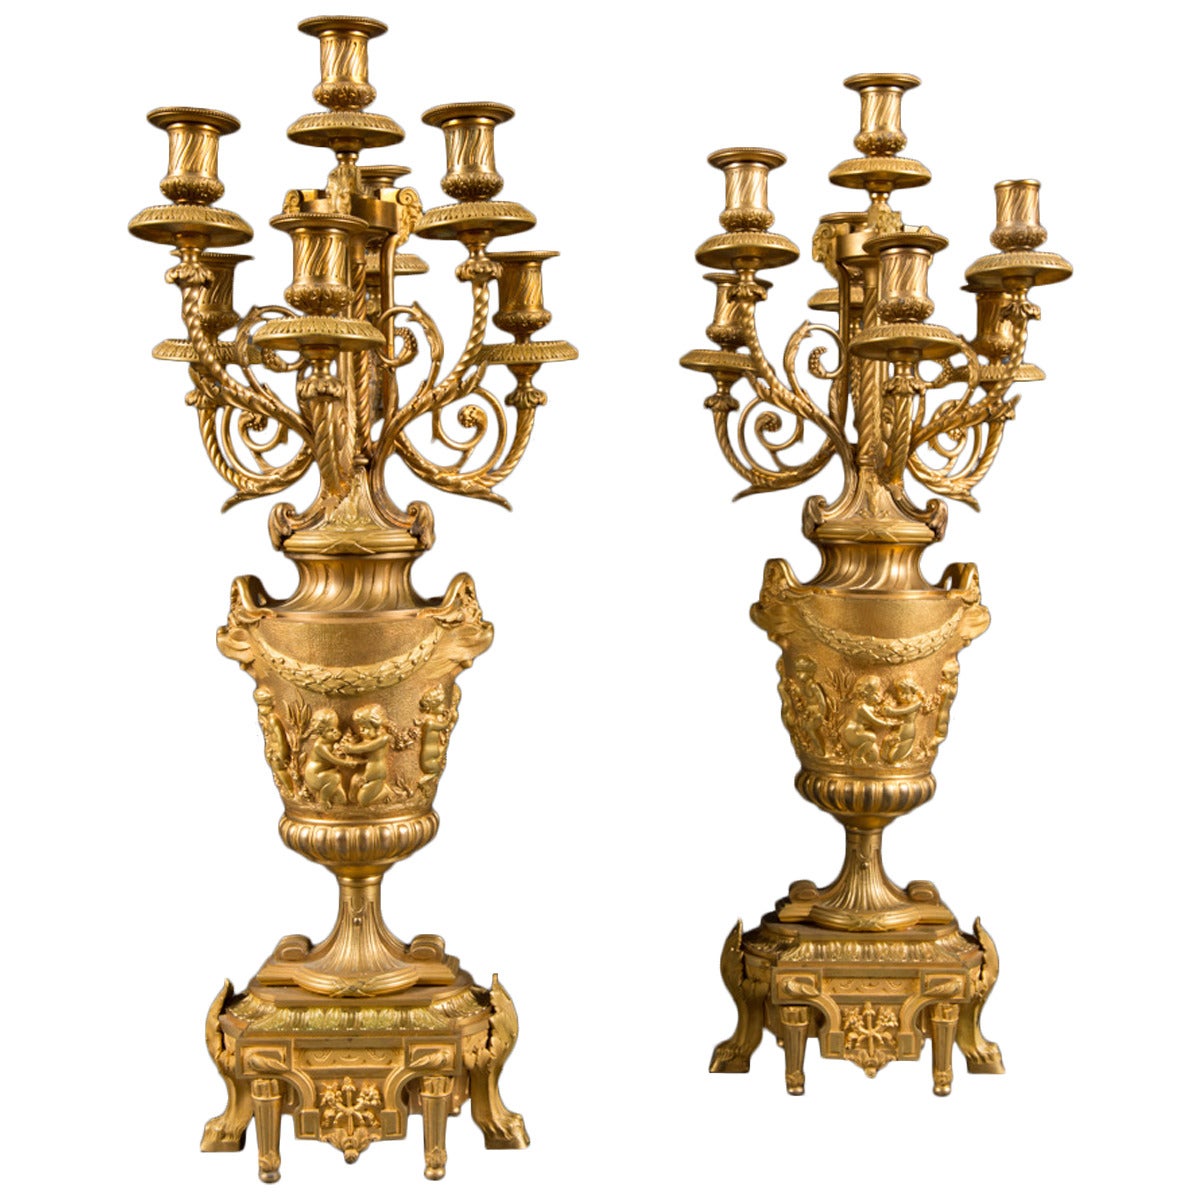 A Pair of 19th Century French ormolu Candelabras attr. to F. Barbedienne